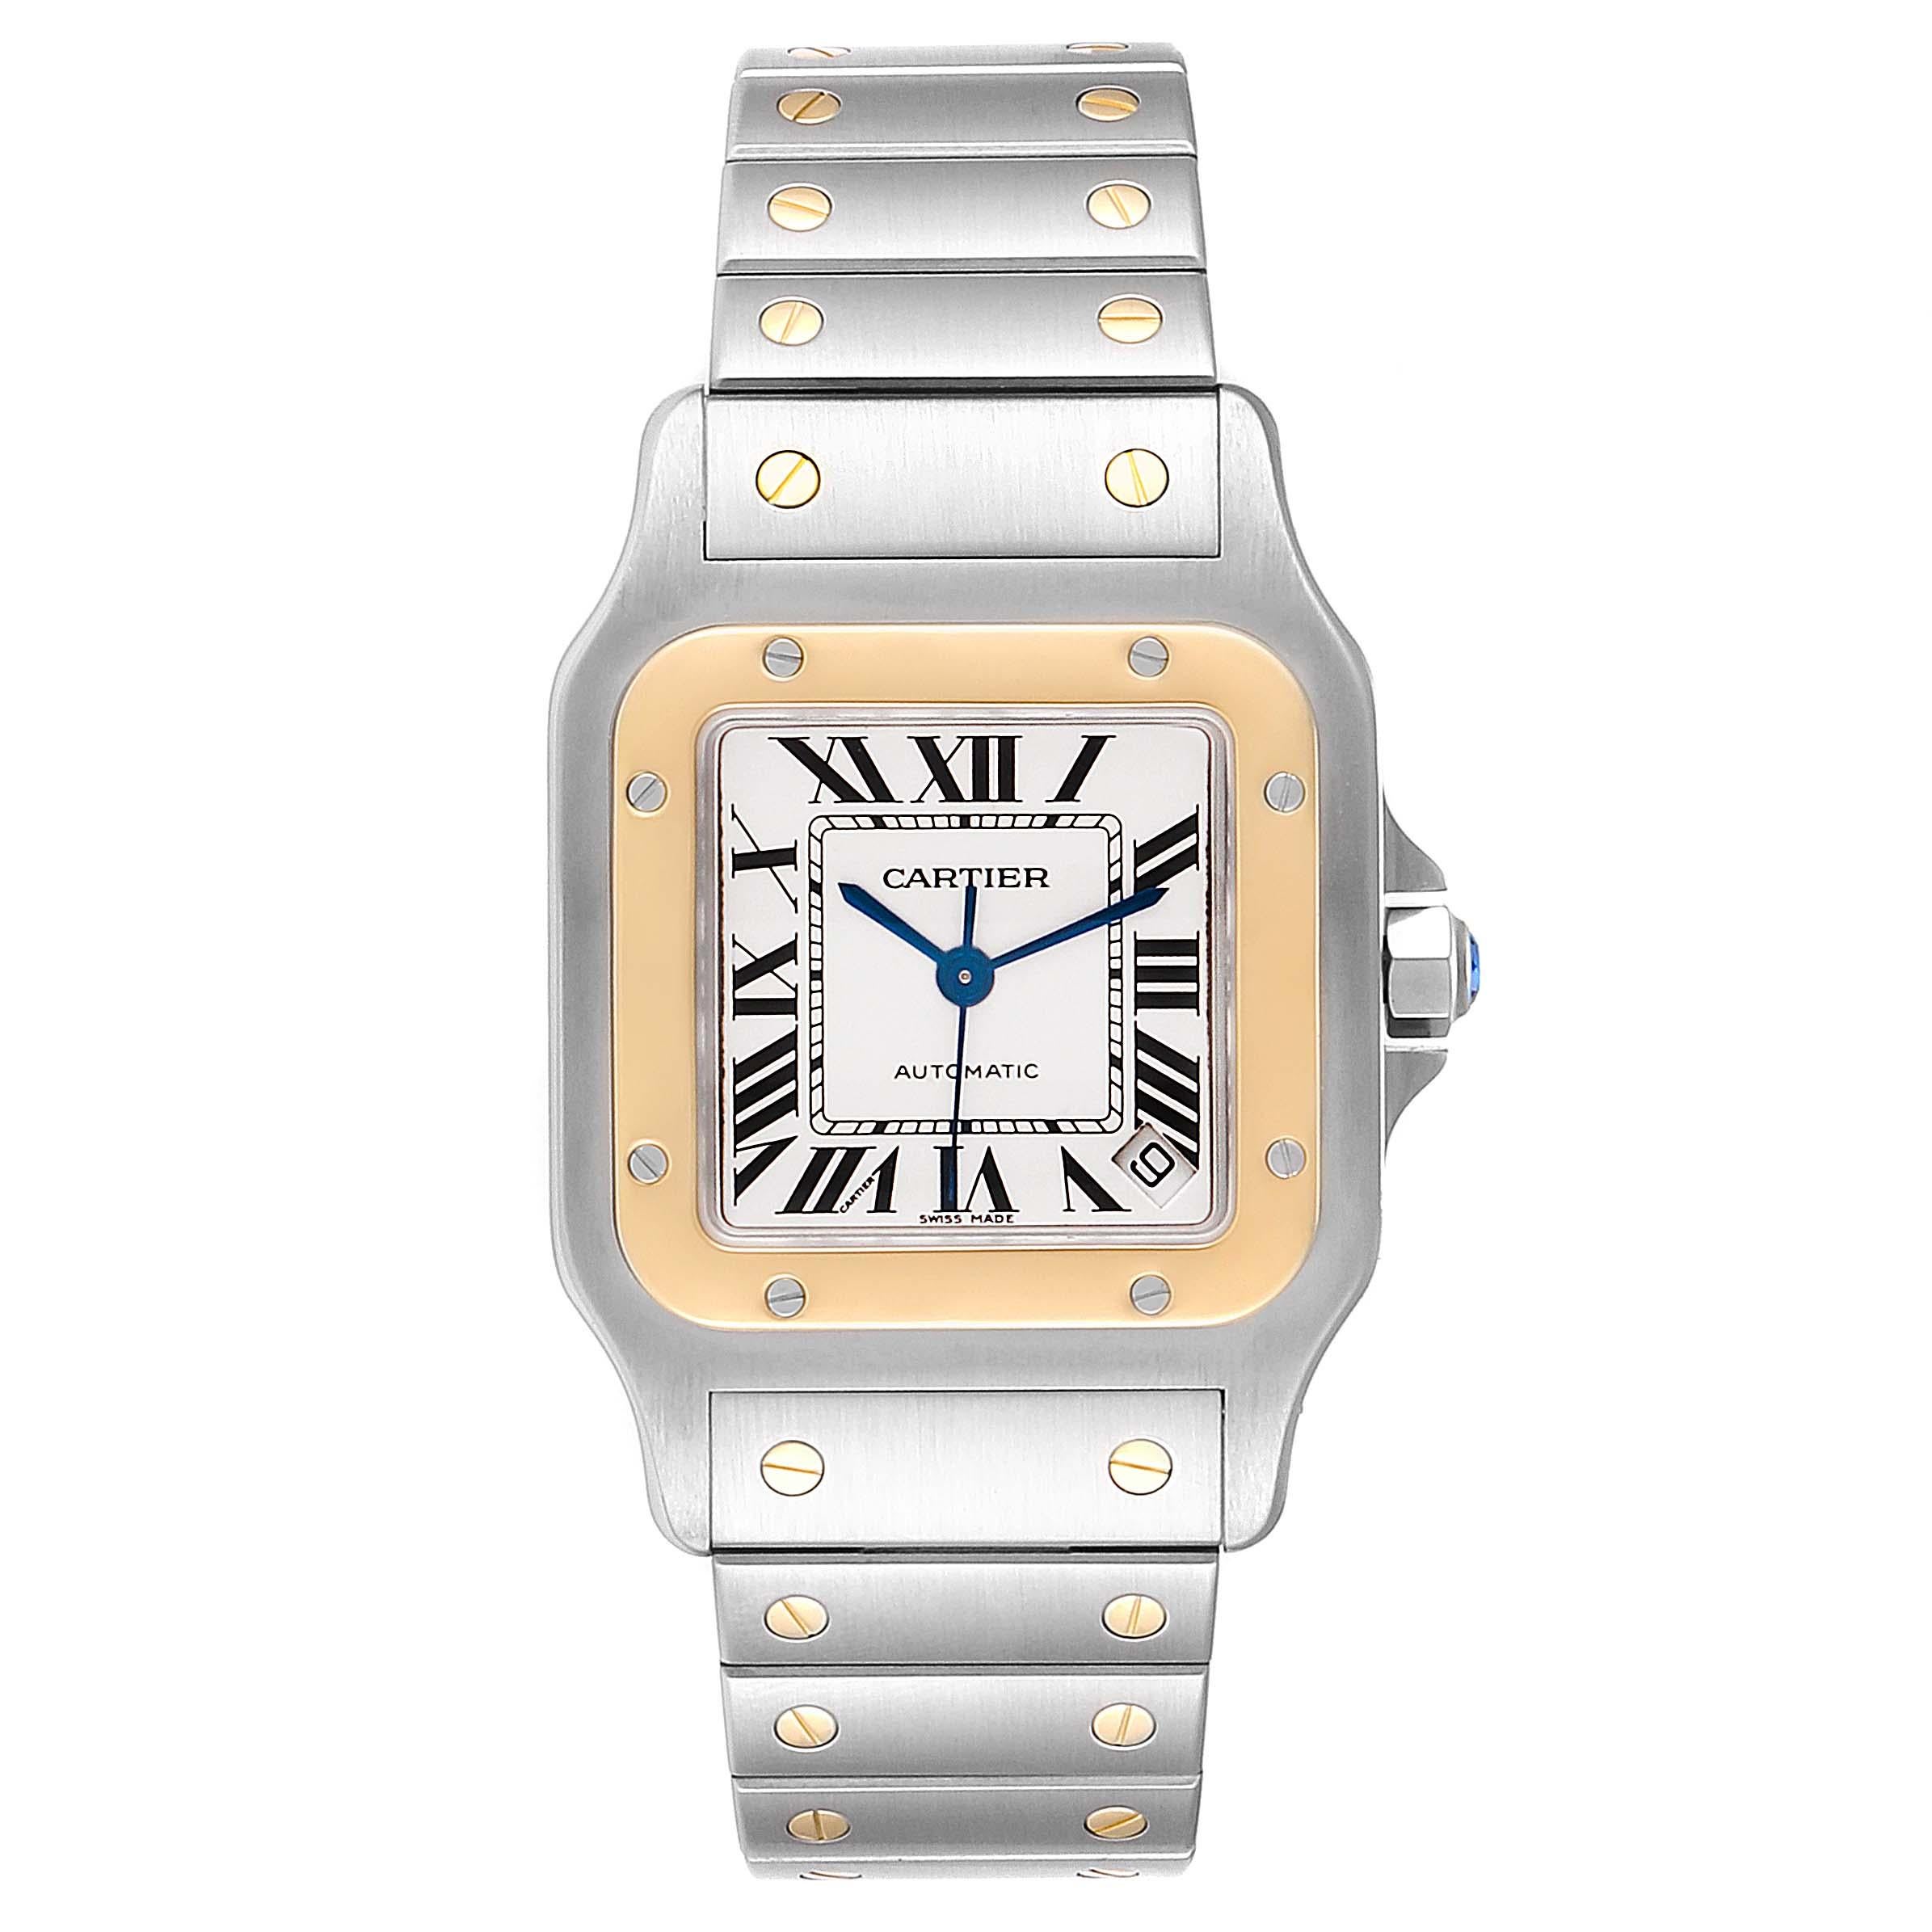 Cartier Santos Galbee XL Steel Yellow Gold Mens Watch W20099C4 Box Papers. Automatic self-winding movement caliber 049. Three body brushed and polished stainless steel case 34.87 X 45.54 mm. Stainless steel protected octagonal crown set with the